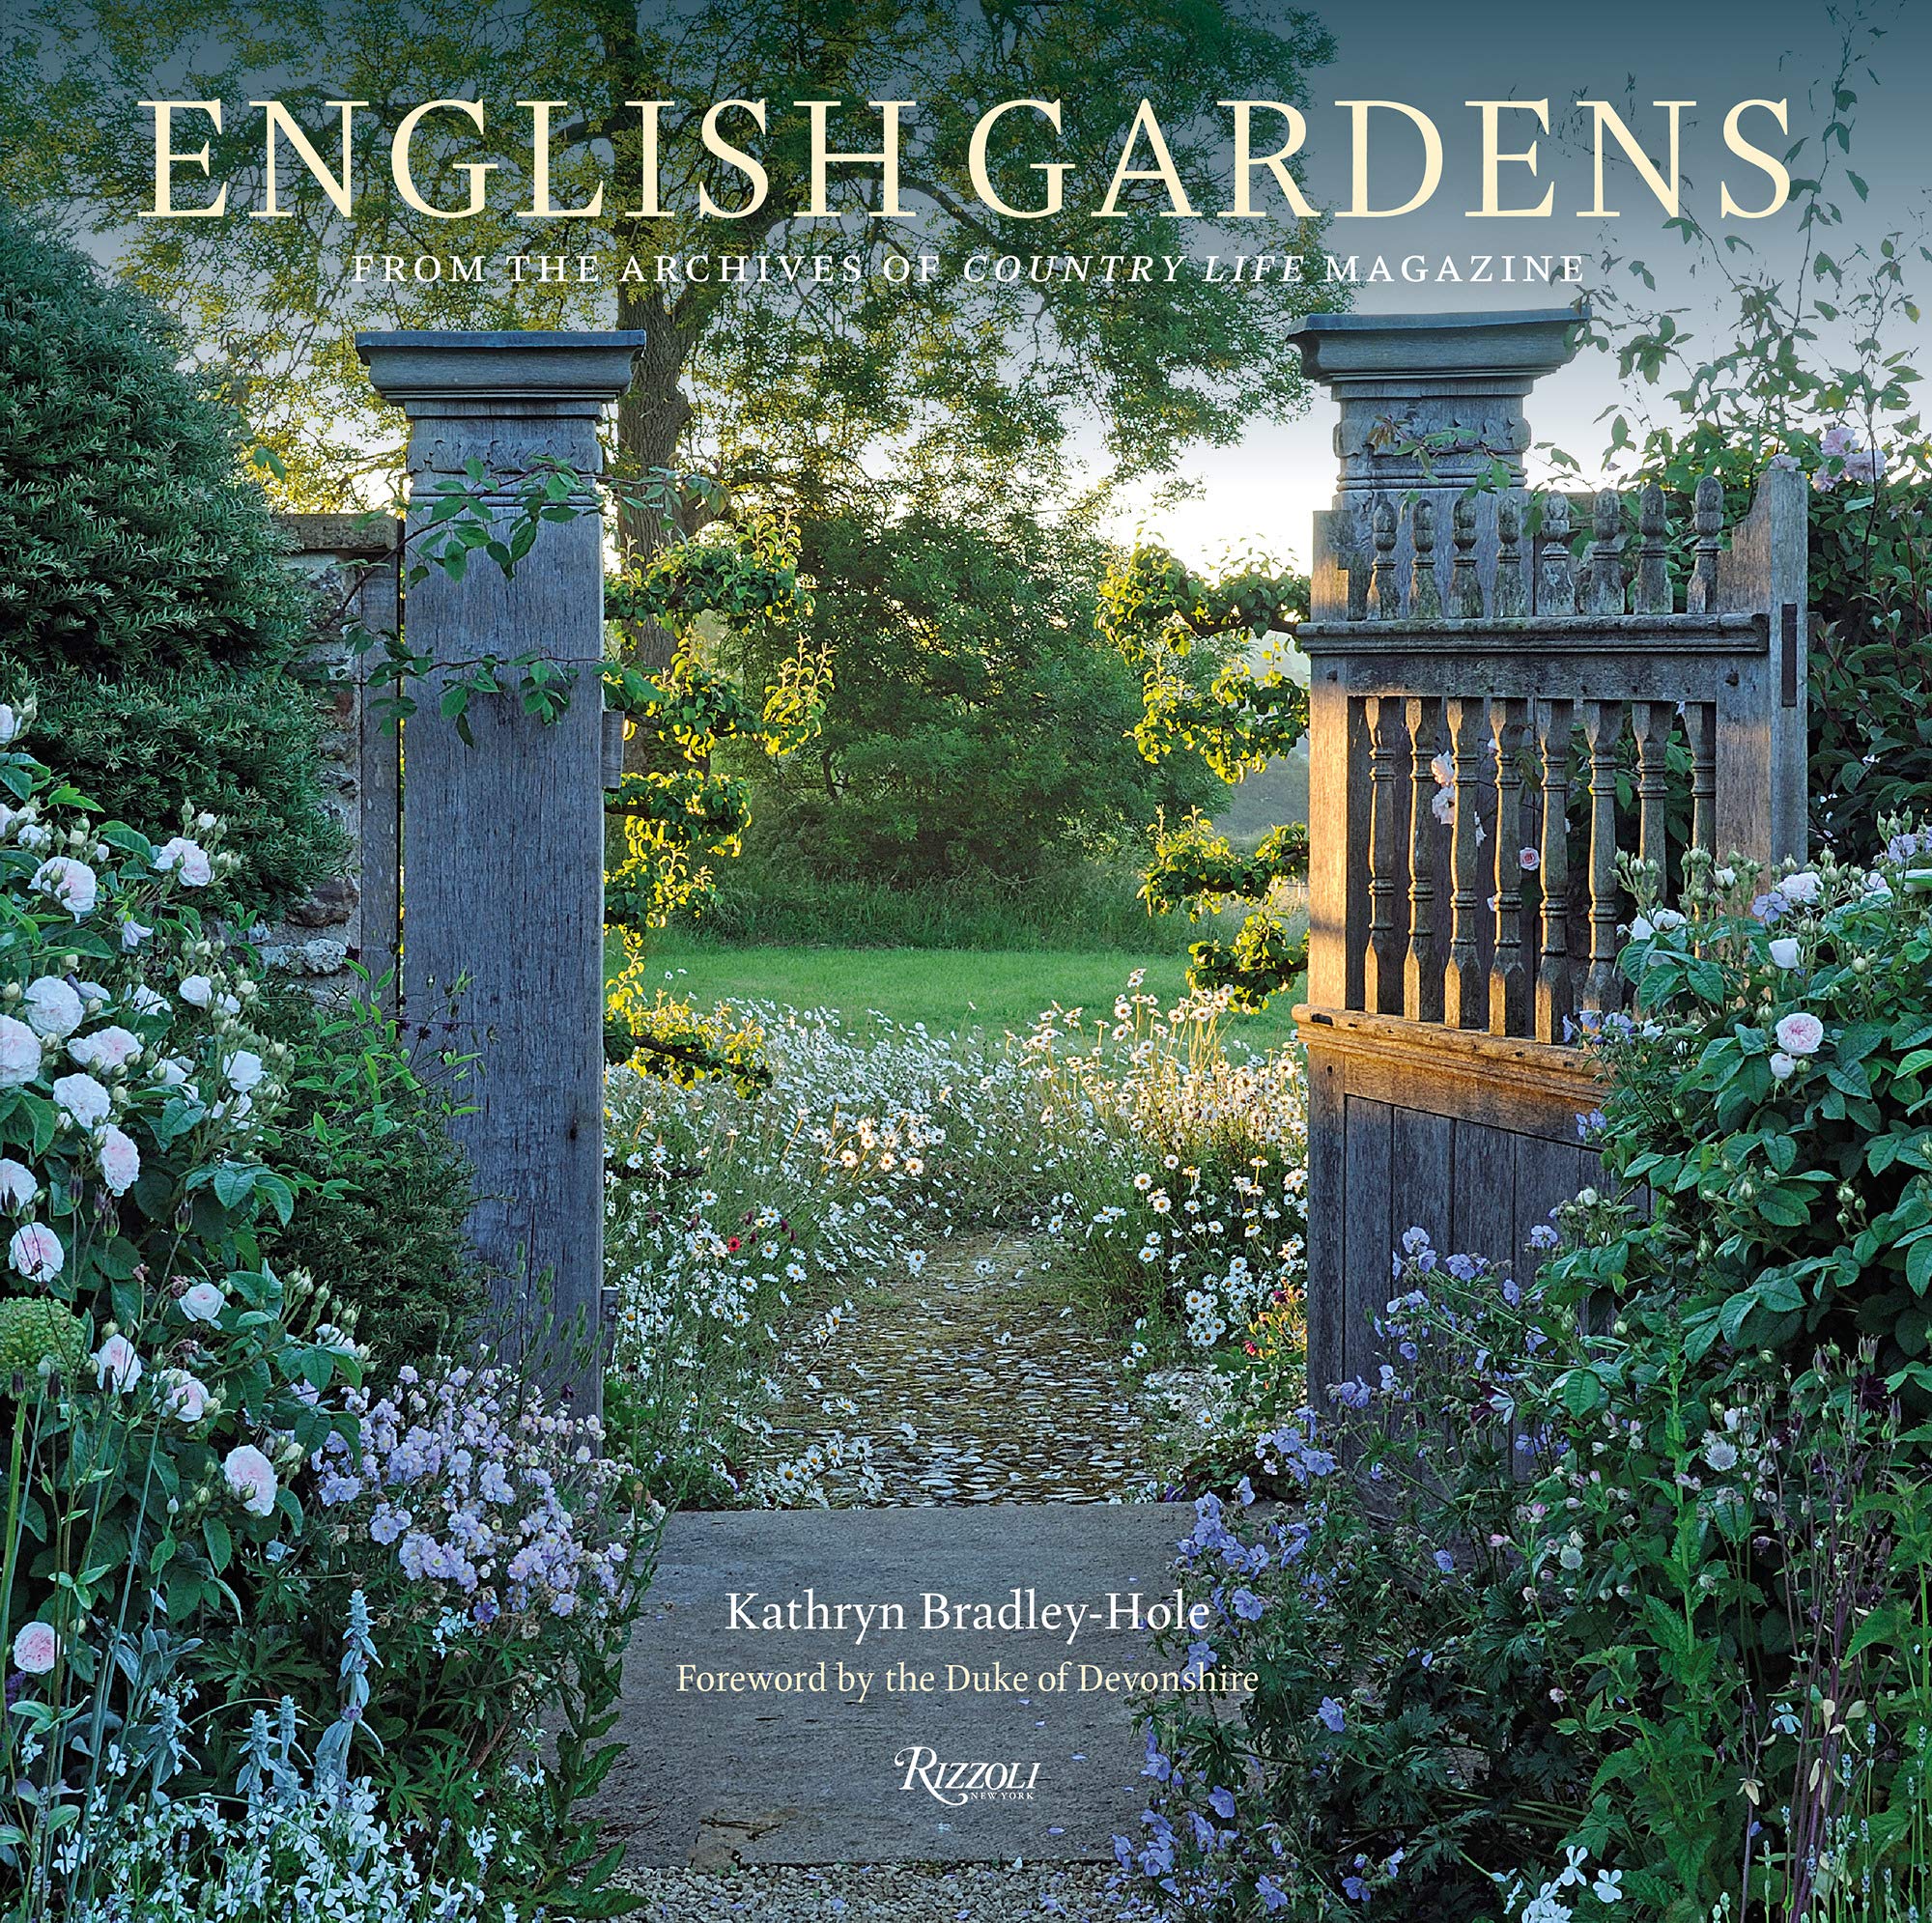 Fall 2020 Online Lectures & Tours - A Celebration of English Gardens ...